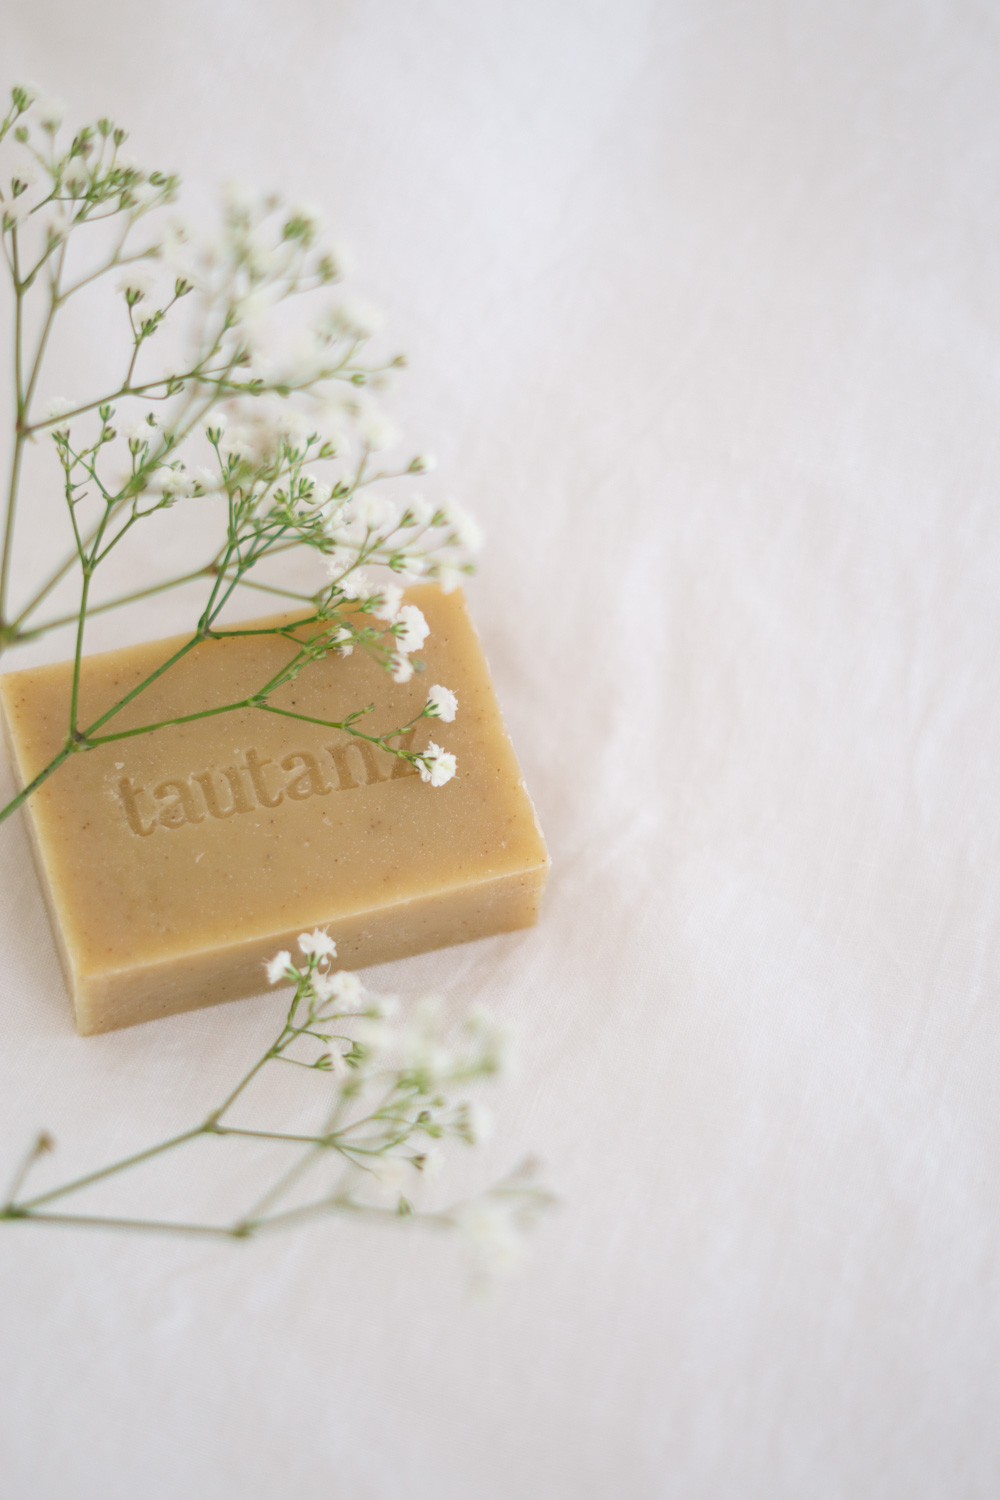 Tautanz Luxury Beauty - Handmade Soap - Natural Skincare - Slow Living - Sustainable Cosmetics - Product Photography - Natural Skin